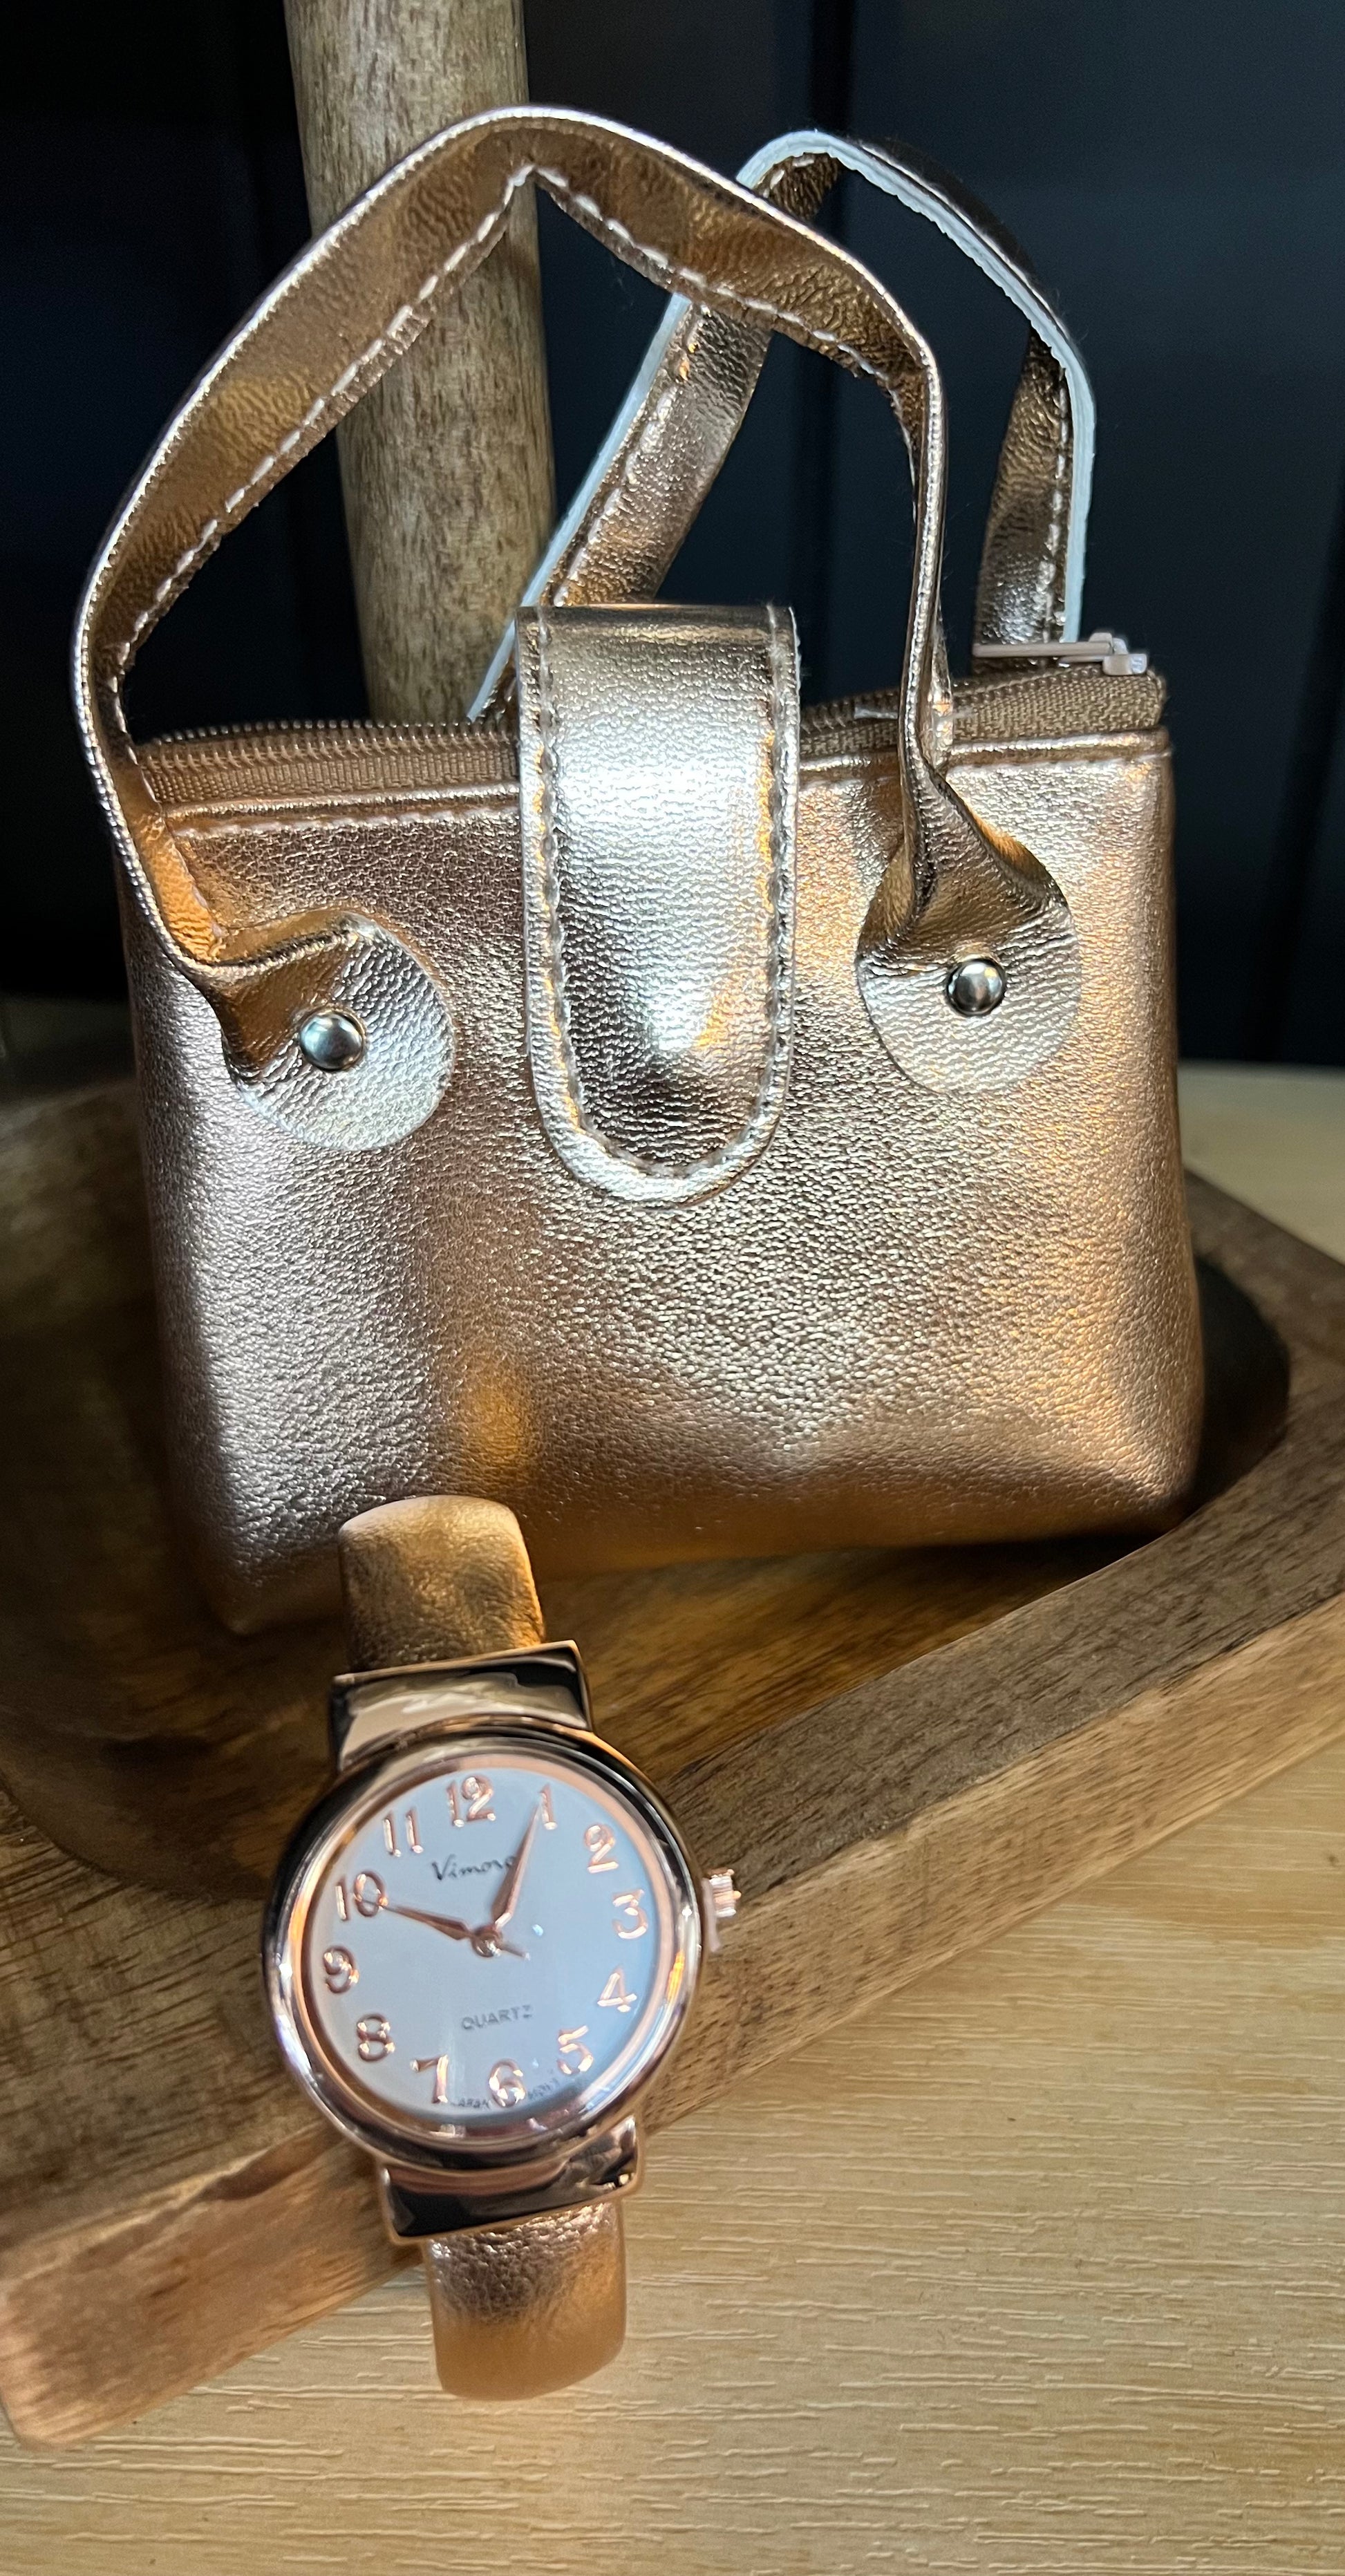 Watch with Carry Bag - Emelda's Shoes